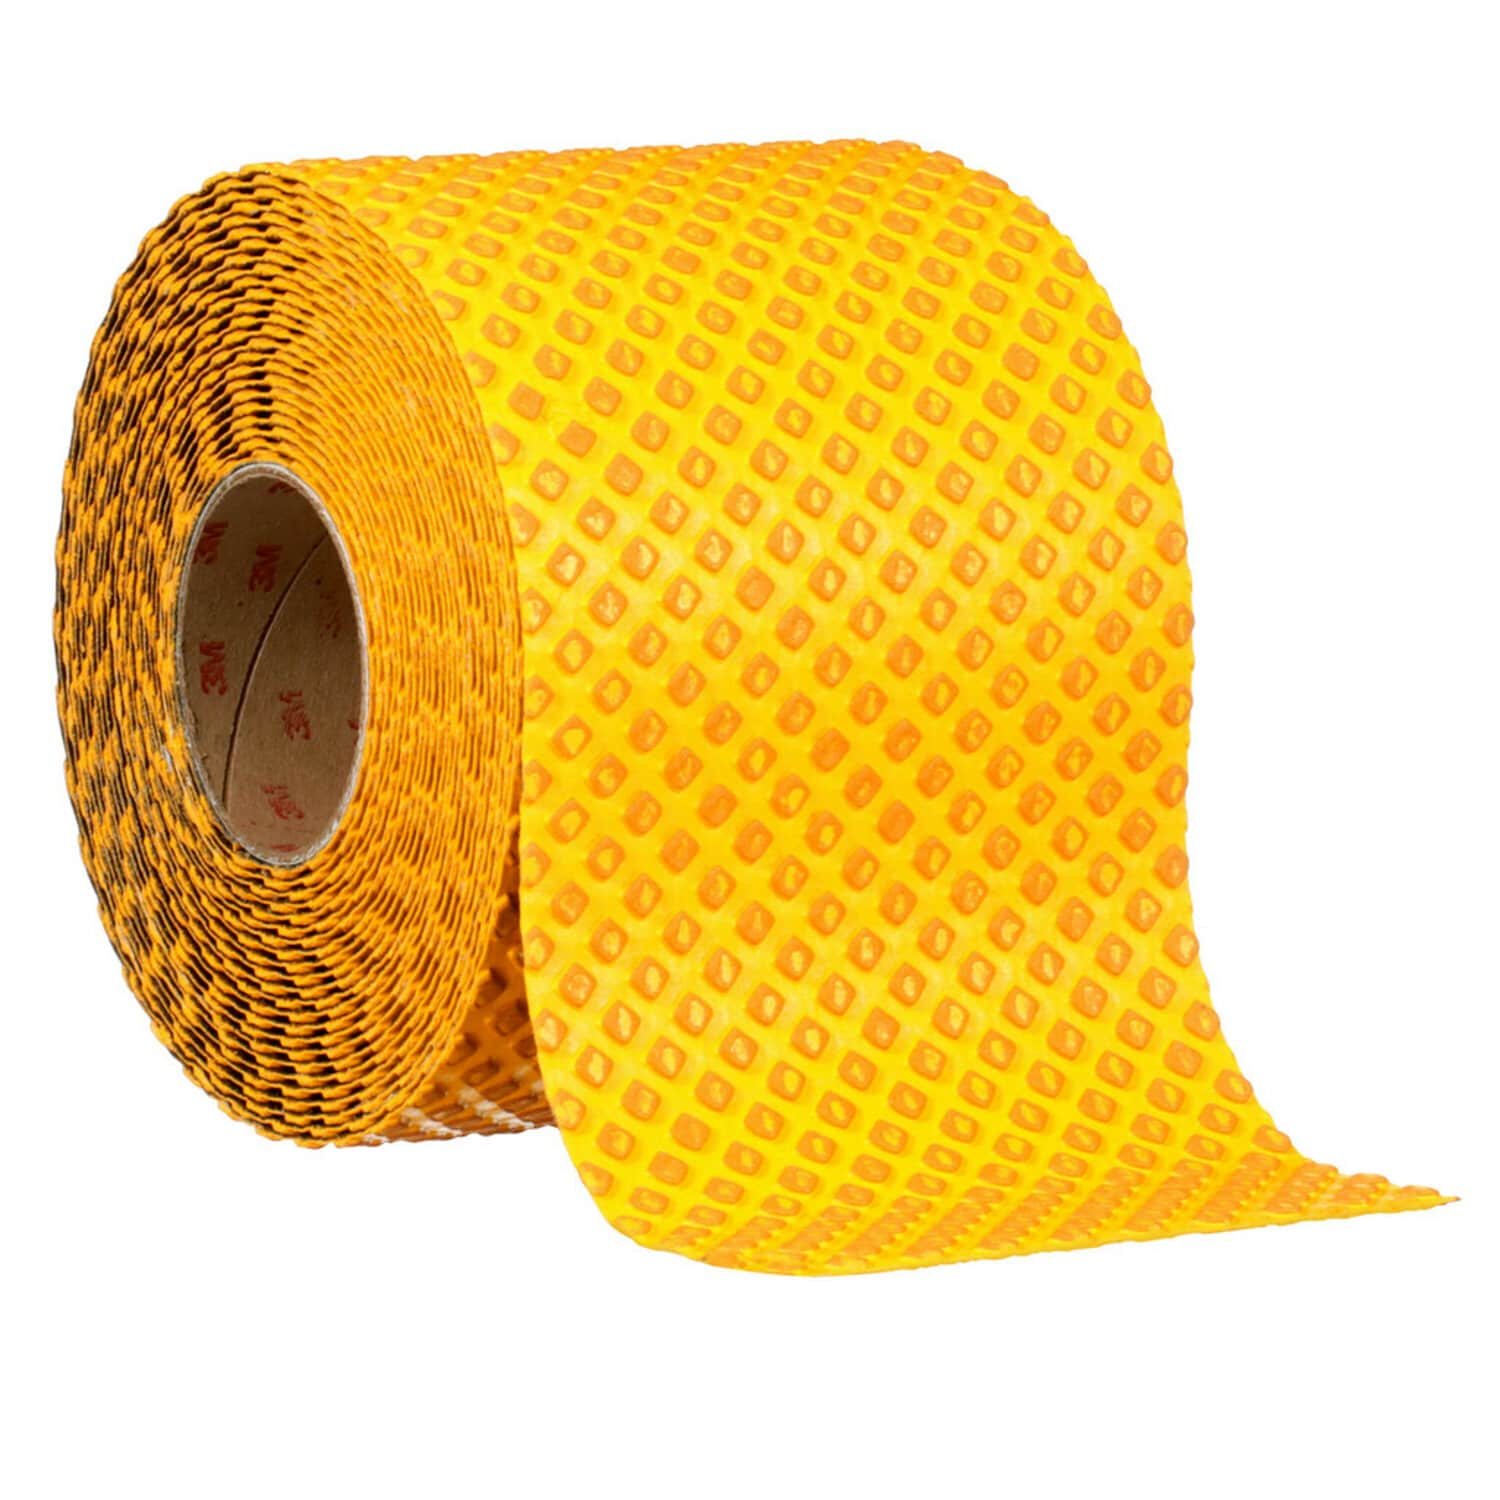 7100009710 - 3M Stamark High Performance Tape A381AW, Yellow, Net, 4 in x 70 yd,
1/Carton